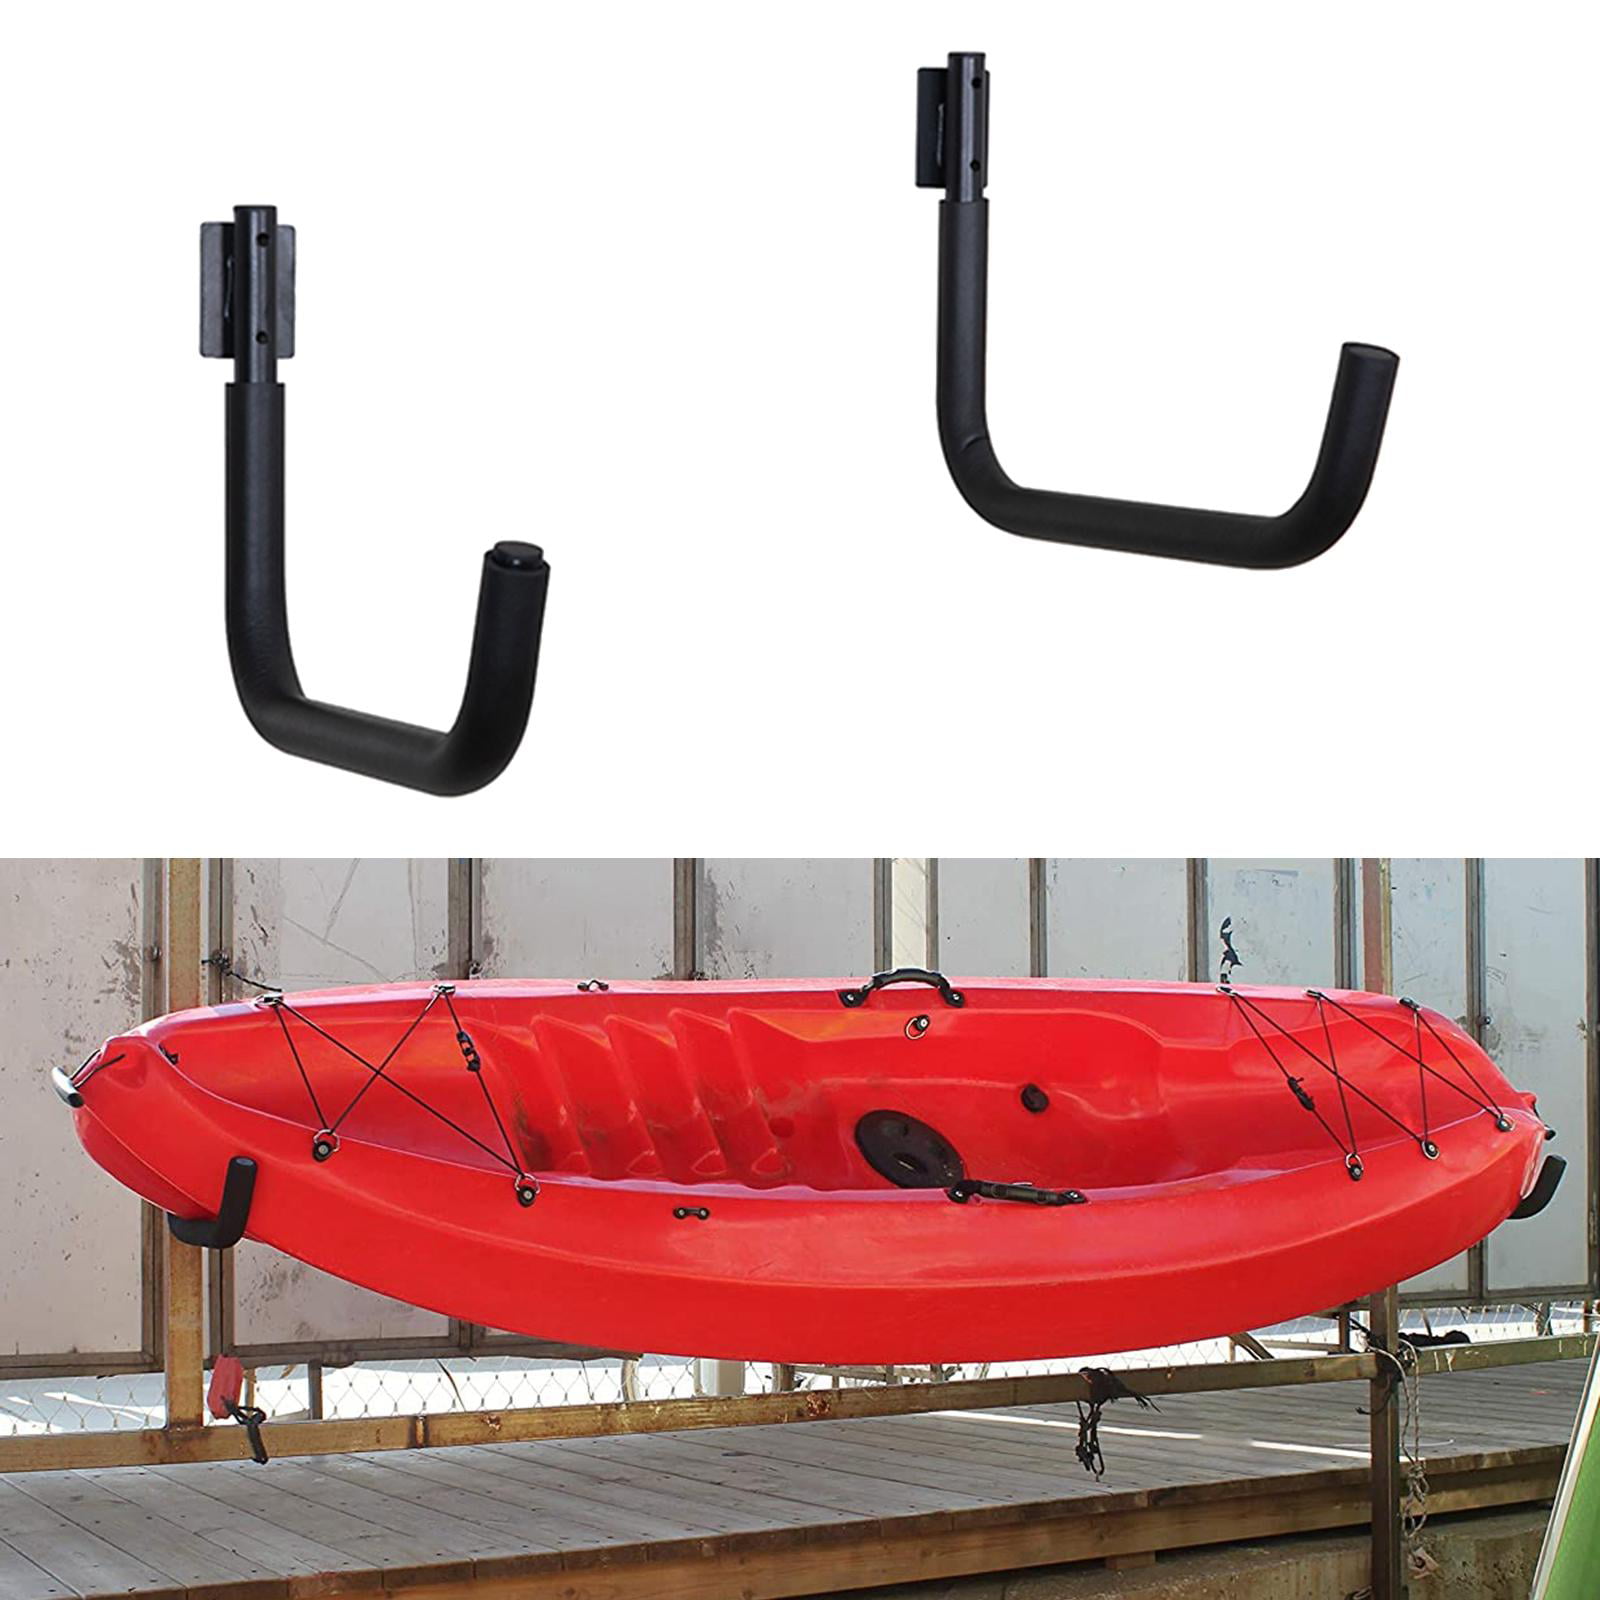 2Pieces Garage Kayak Hooks Heavy Duty, Wall Mounted Canoe Storage Hanger  Organizer Bracket for Surfboard Paddle, indoor and outdoor Kayak Accessory  